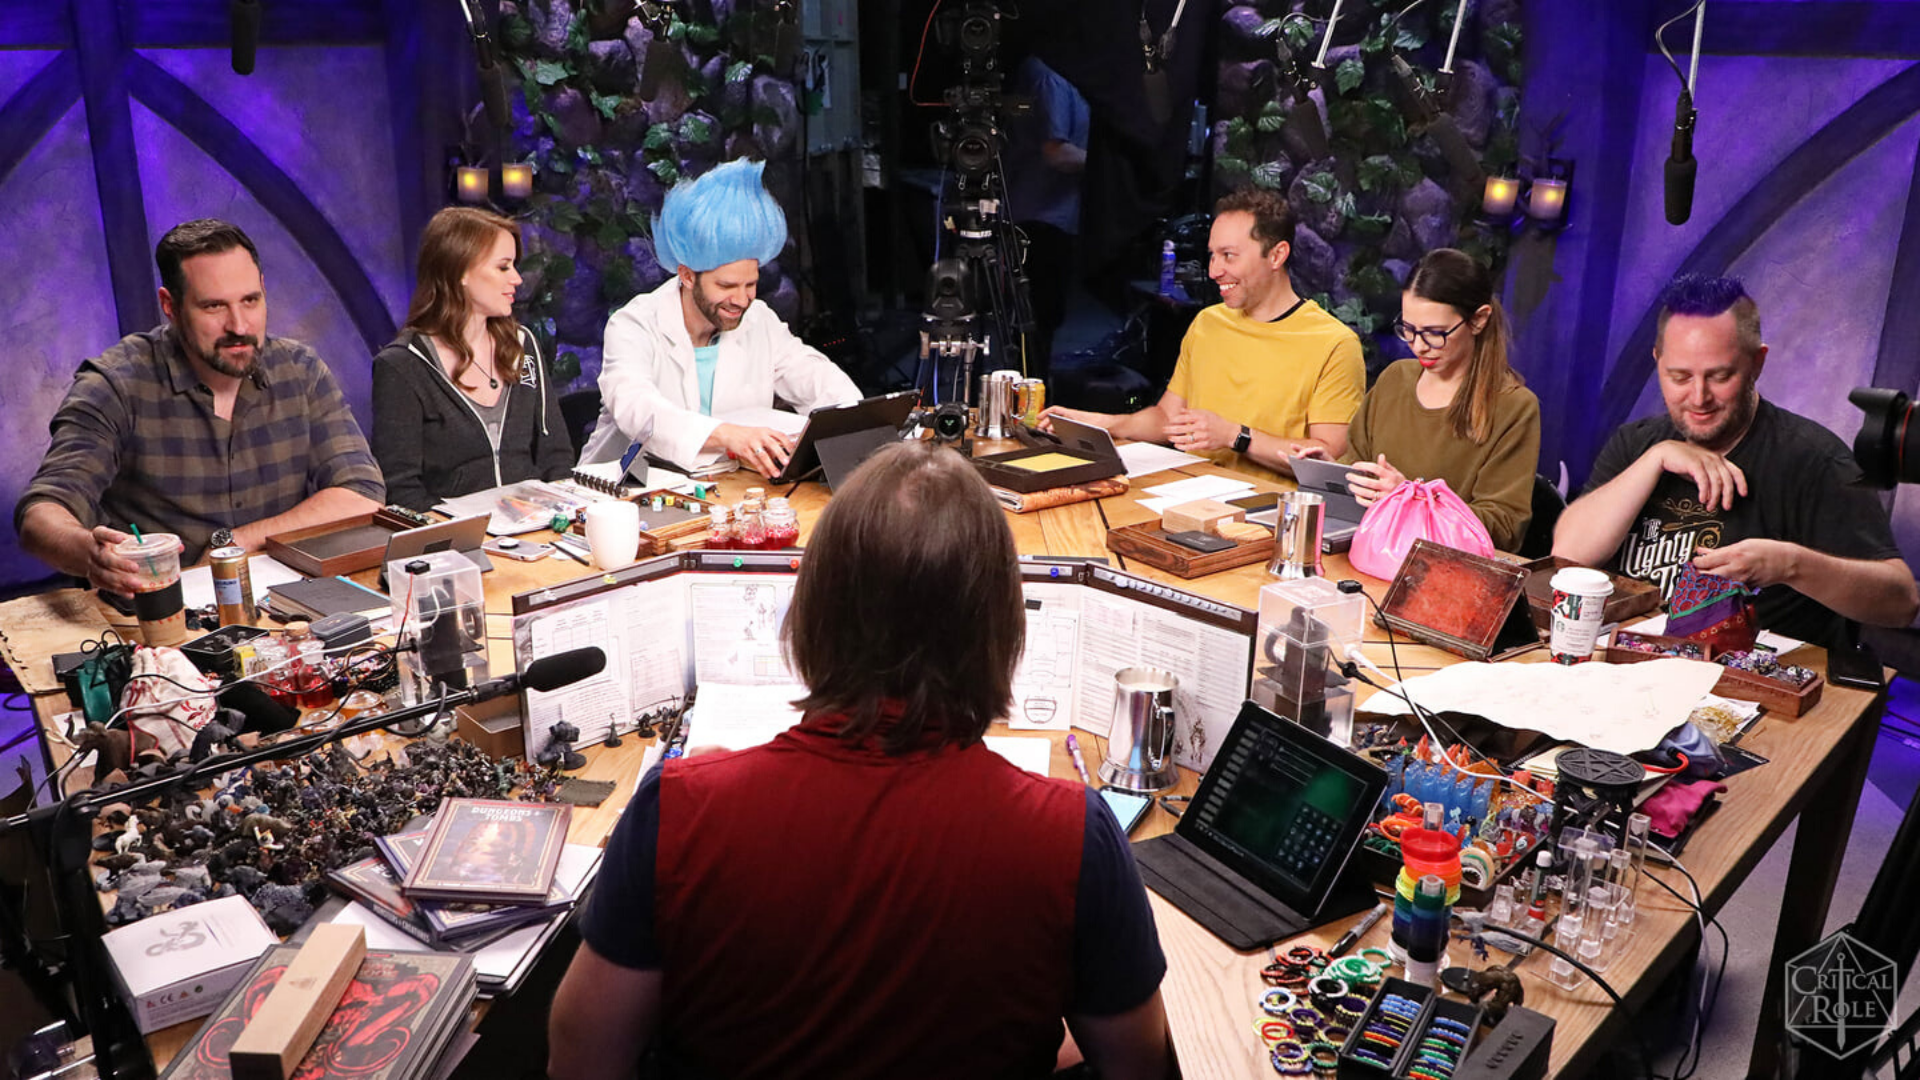 Did ashley leave critical role?